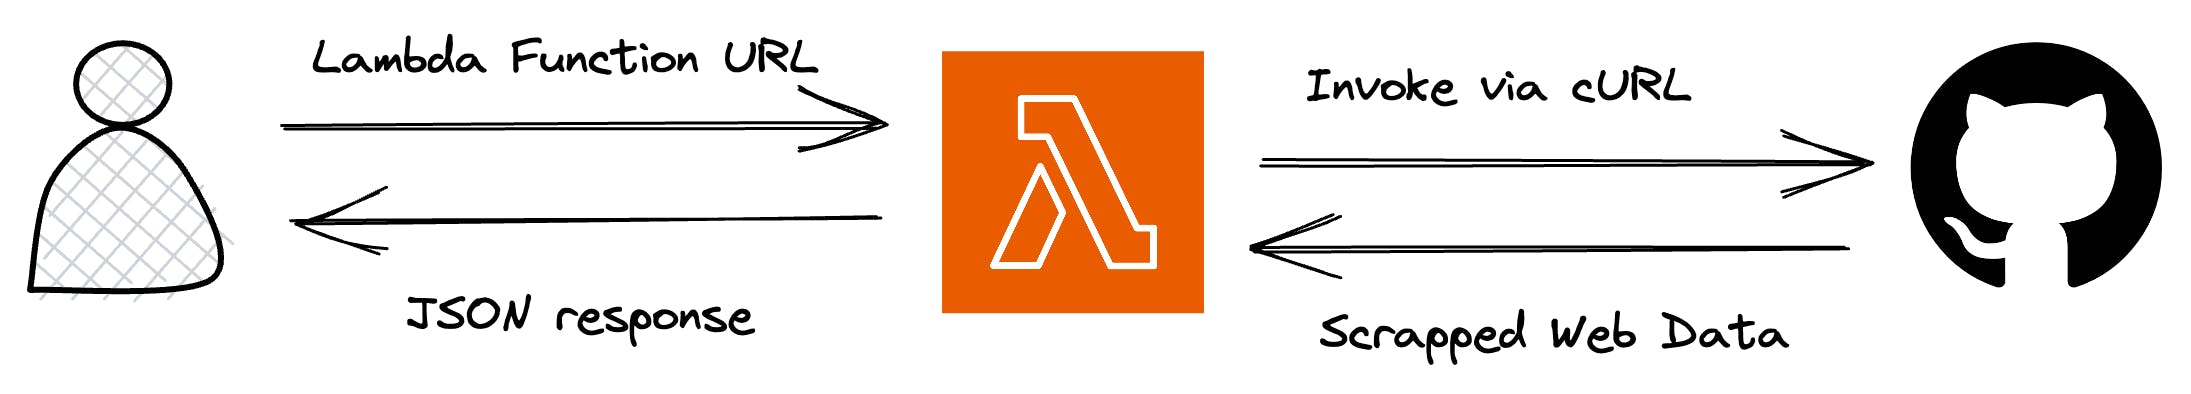 Architecture of Lambda Function URL – Users will invoke a REST API which will trigger a Lambda function and return the scrapped web data from GitHub as a JSON response